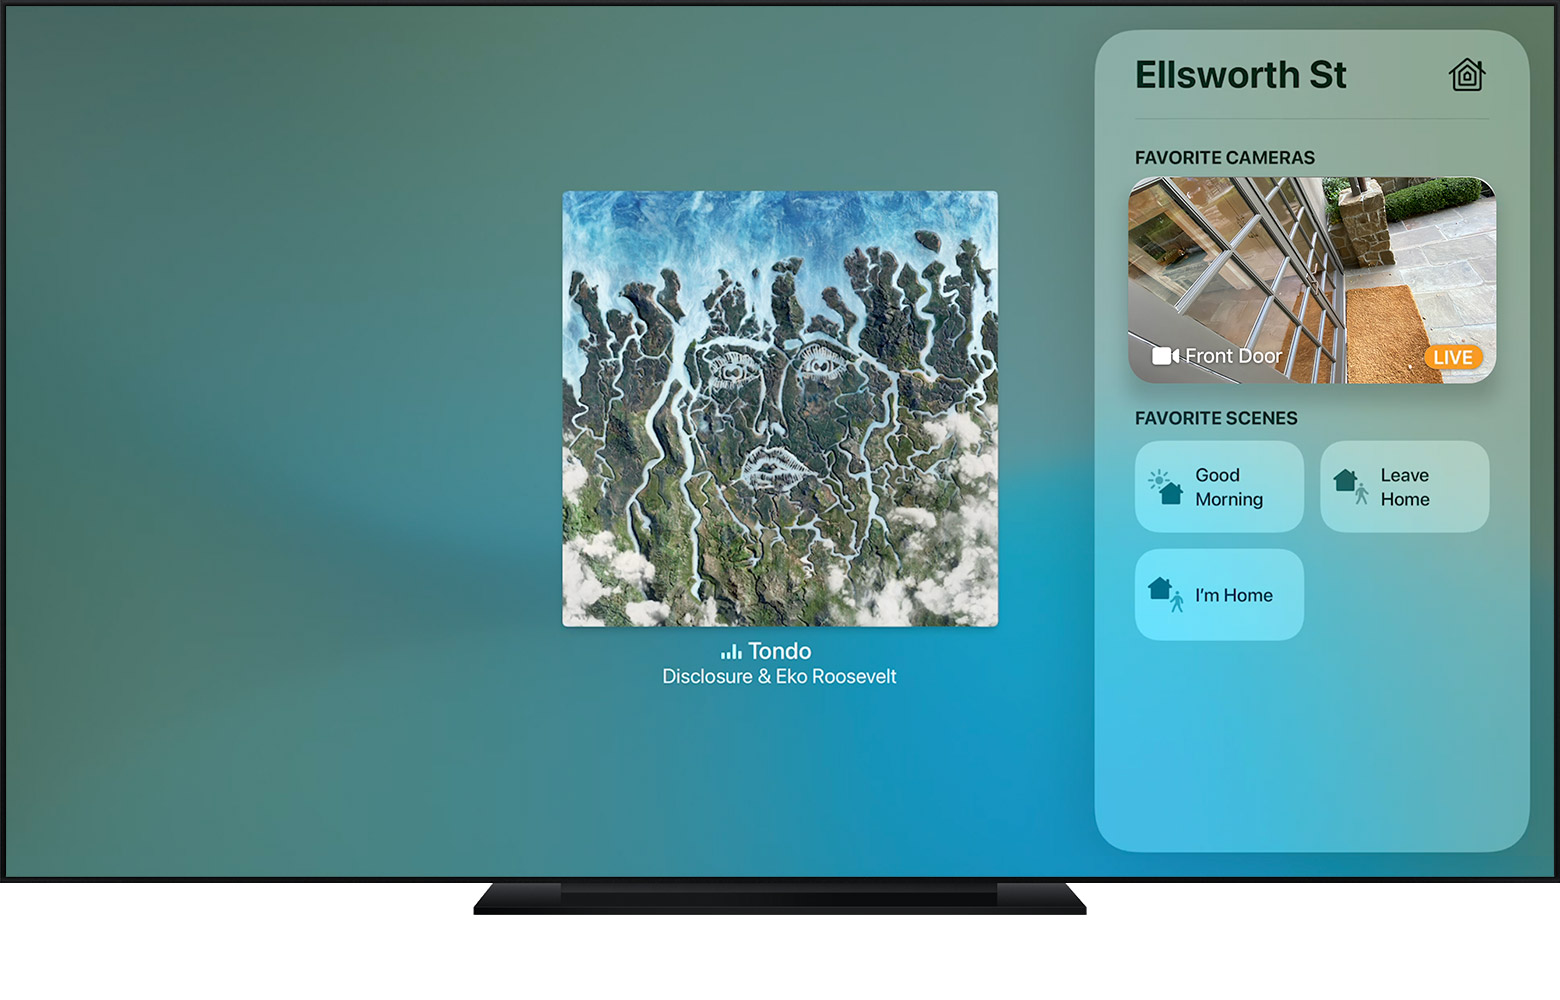 tvOs shows Control Center with a live camera view of the front door.